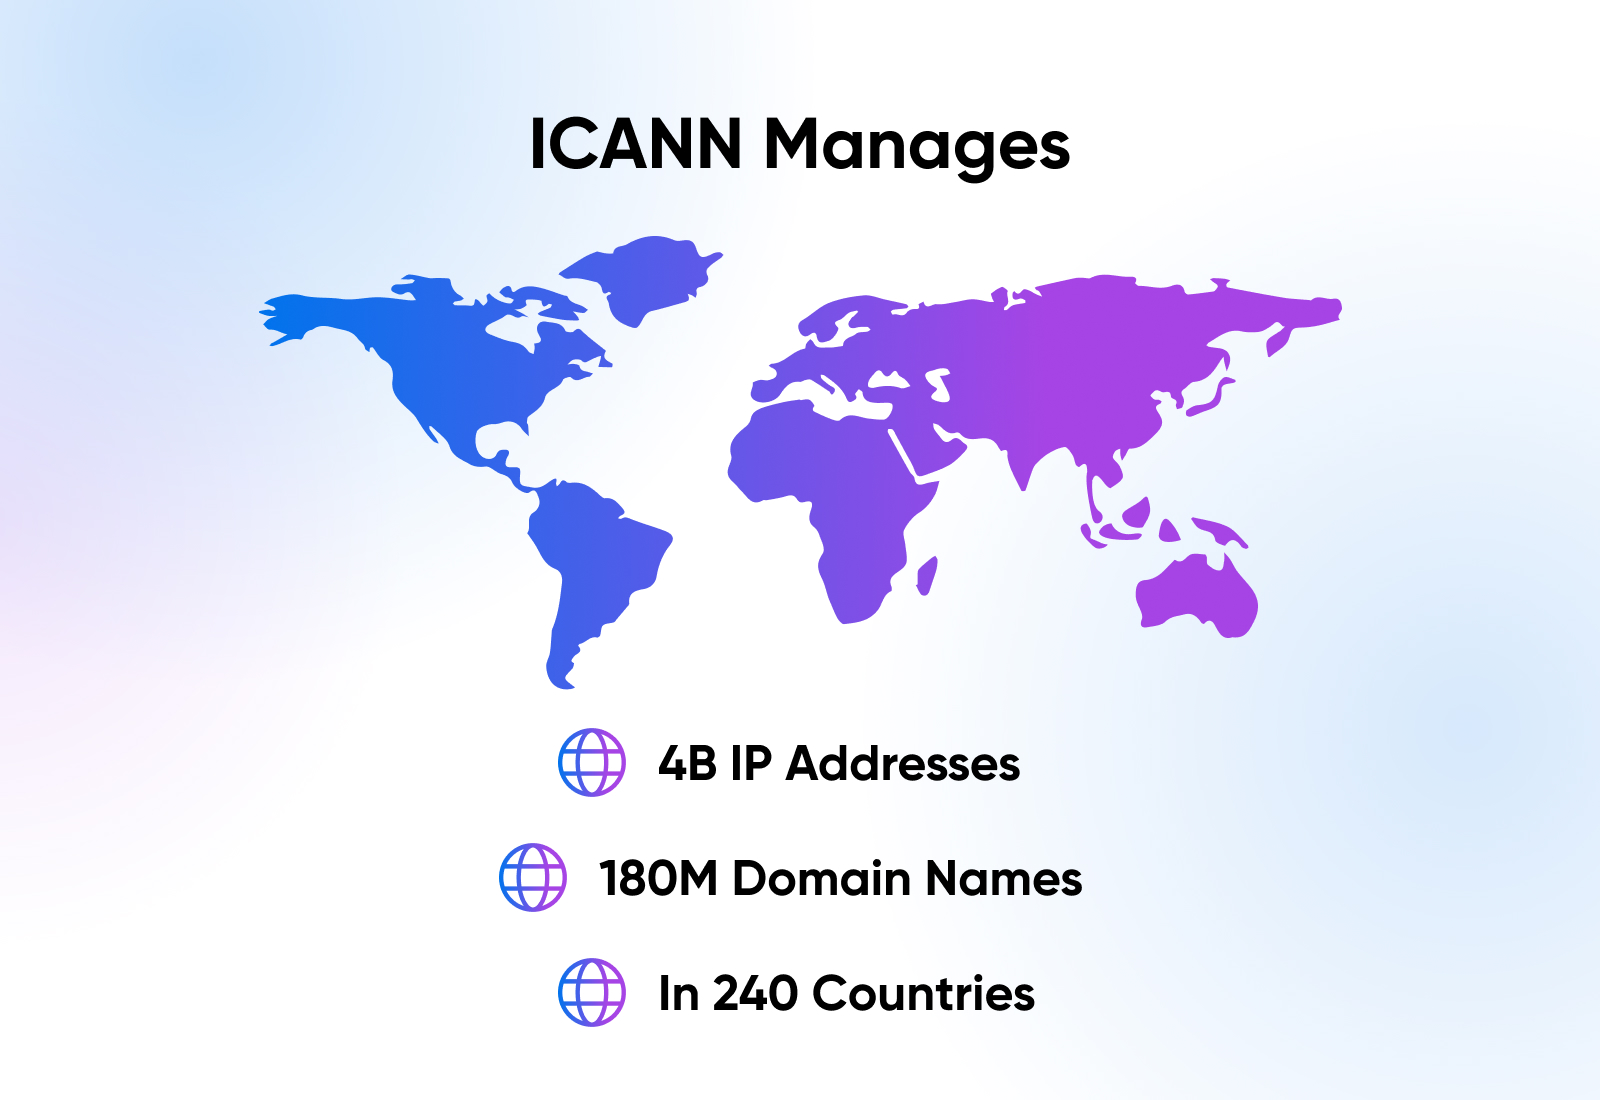 ICANN manages 4B IP Address and 180M Domain Names in 240 countries